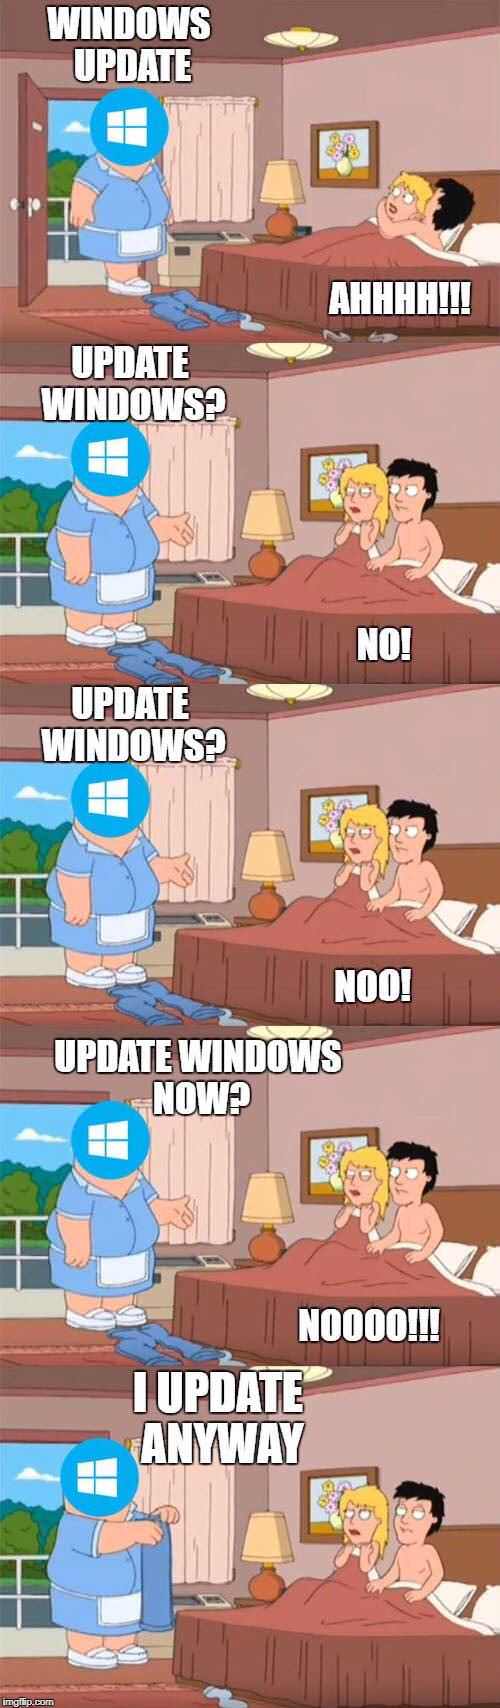 My favorite thing about Windows